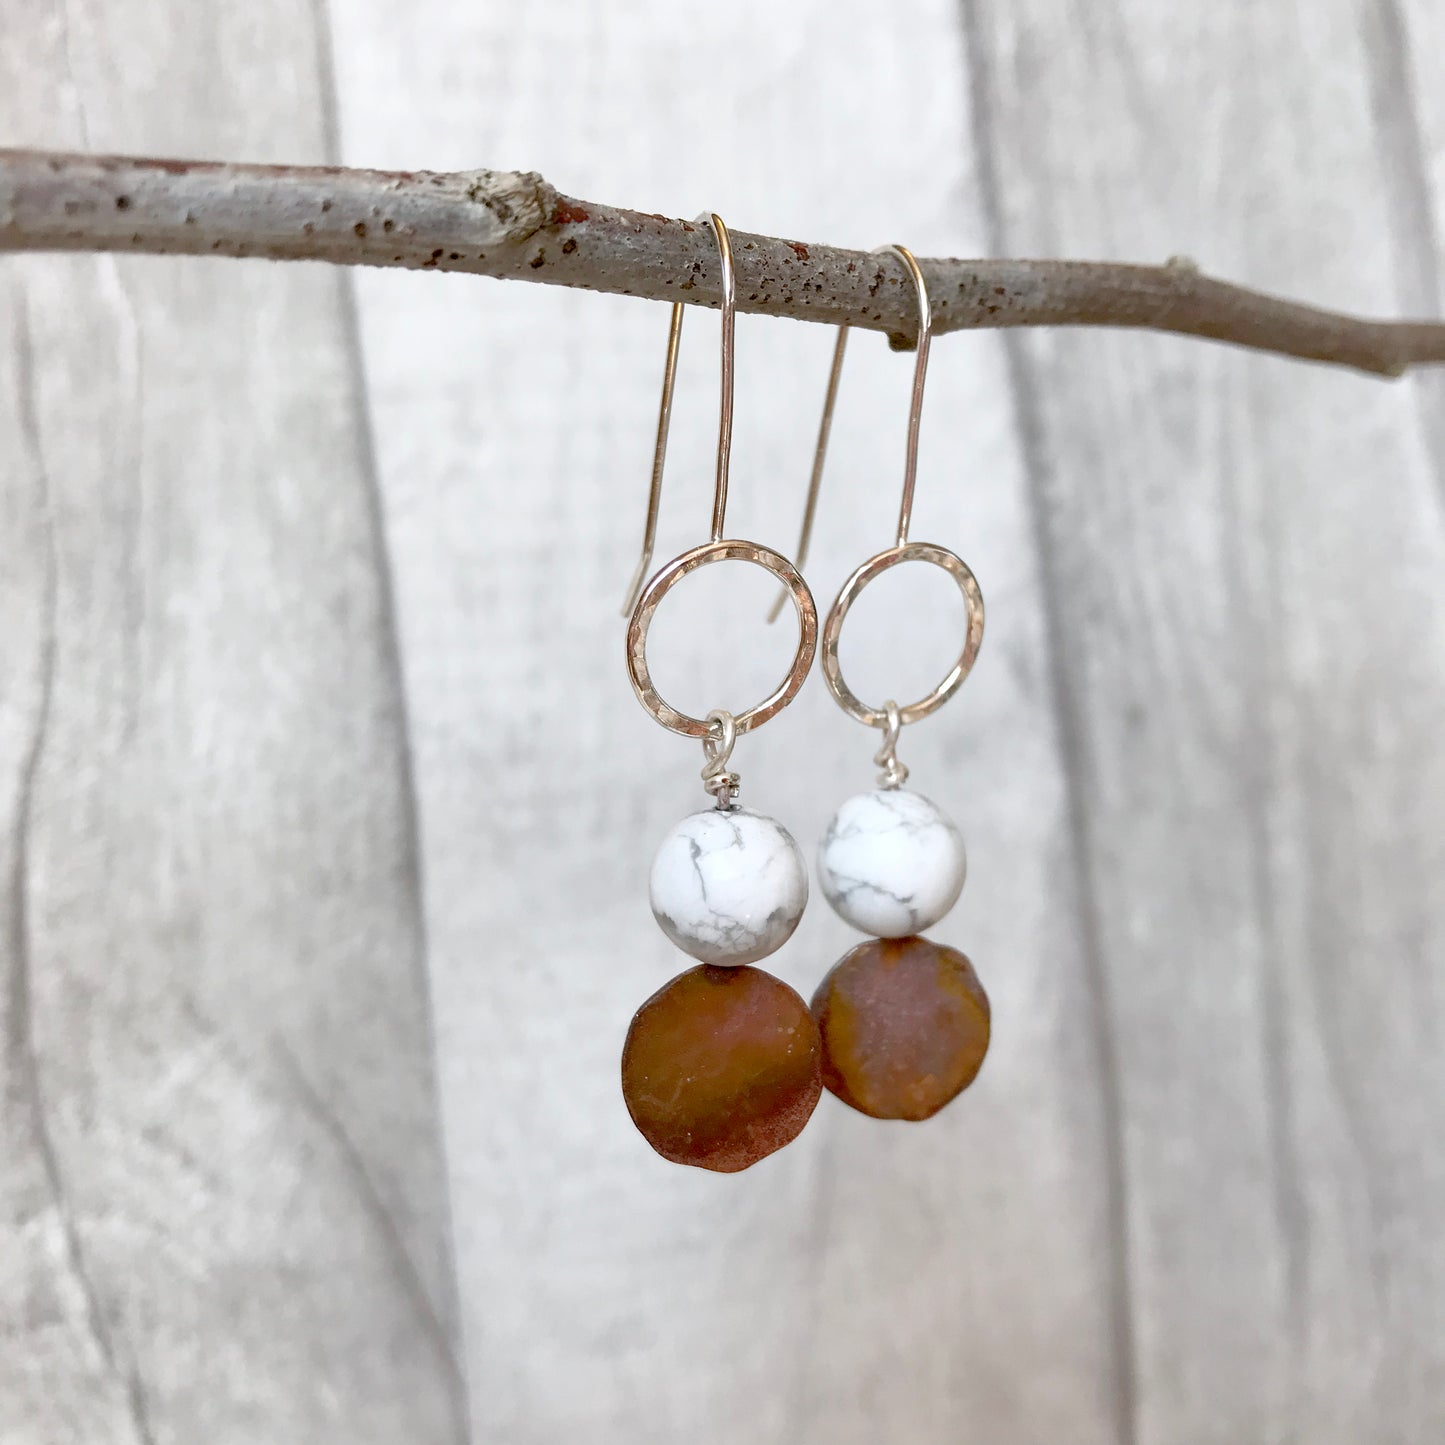 Howlite stone with silver and copper circle earrings